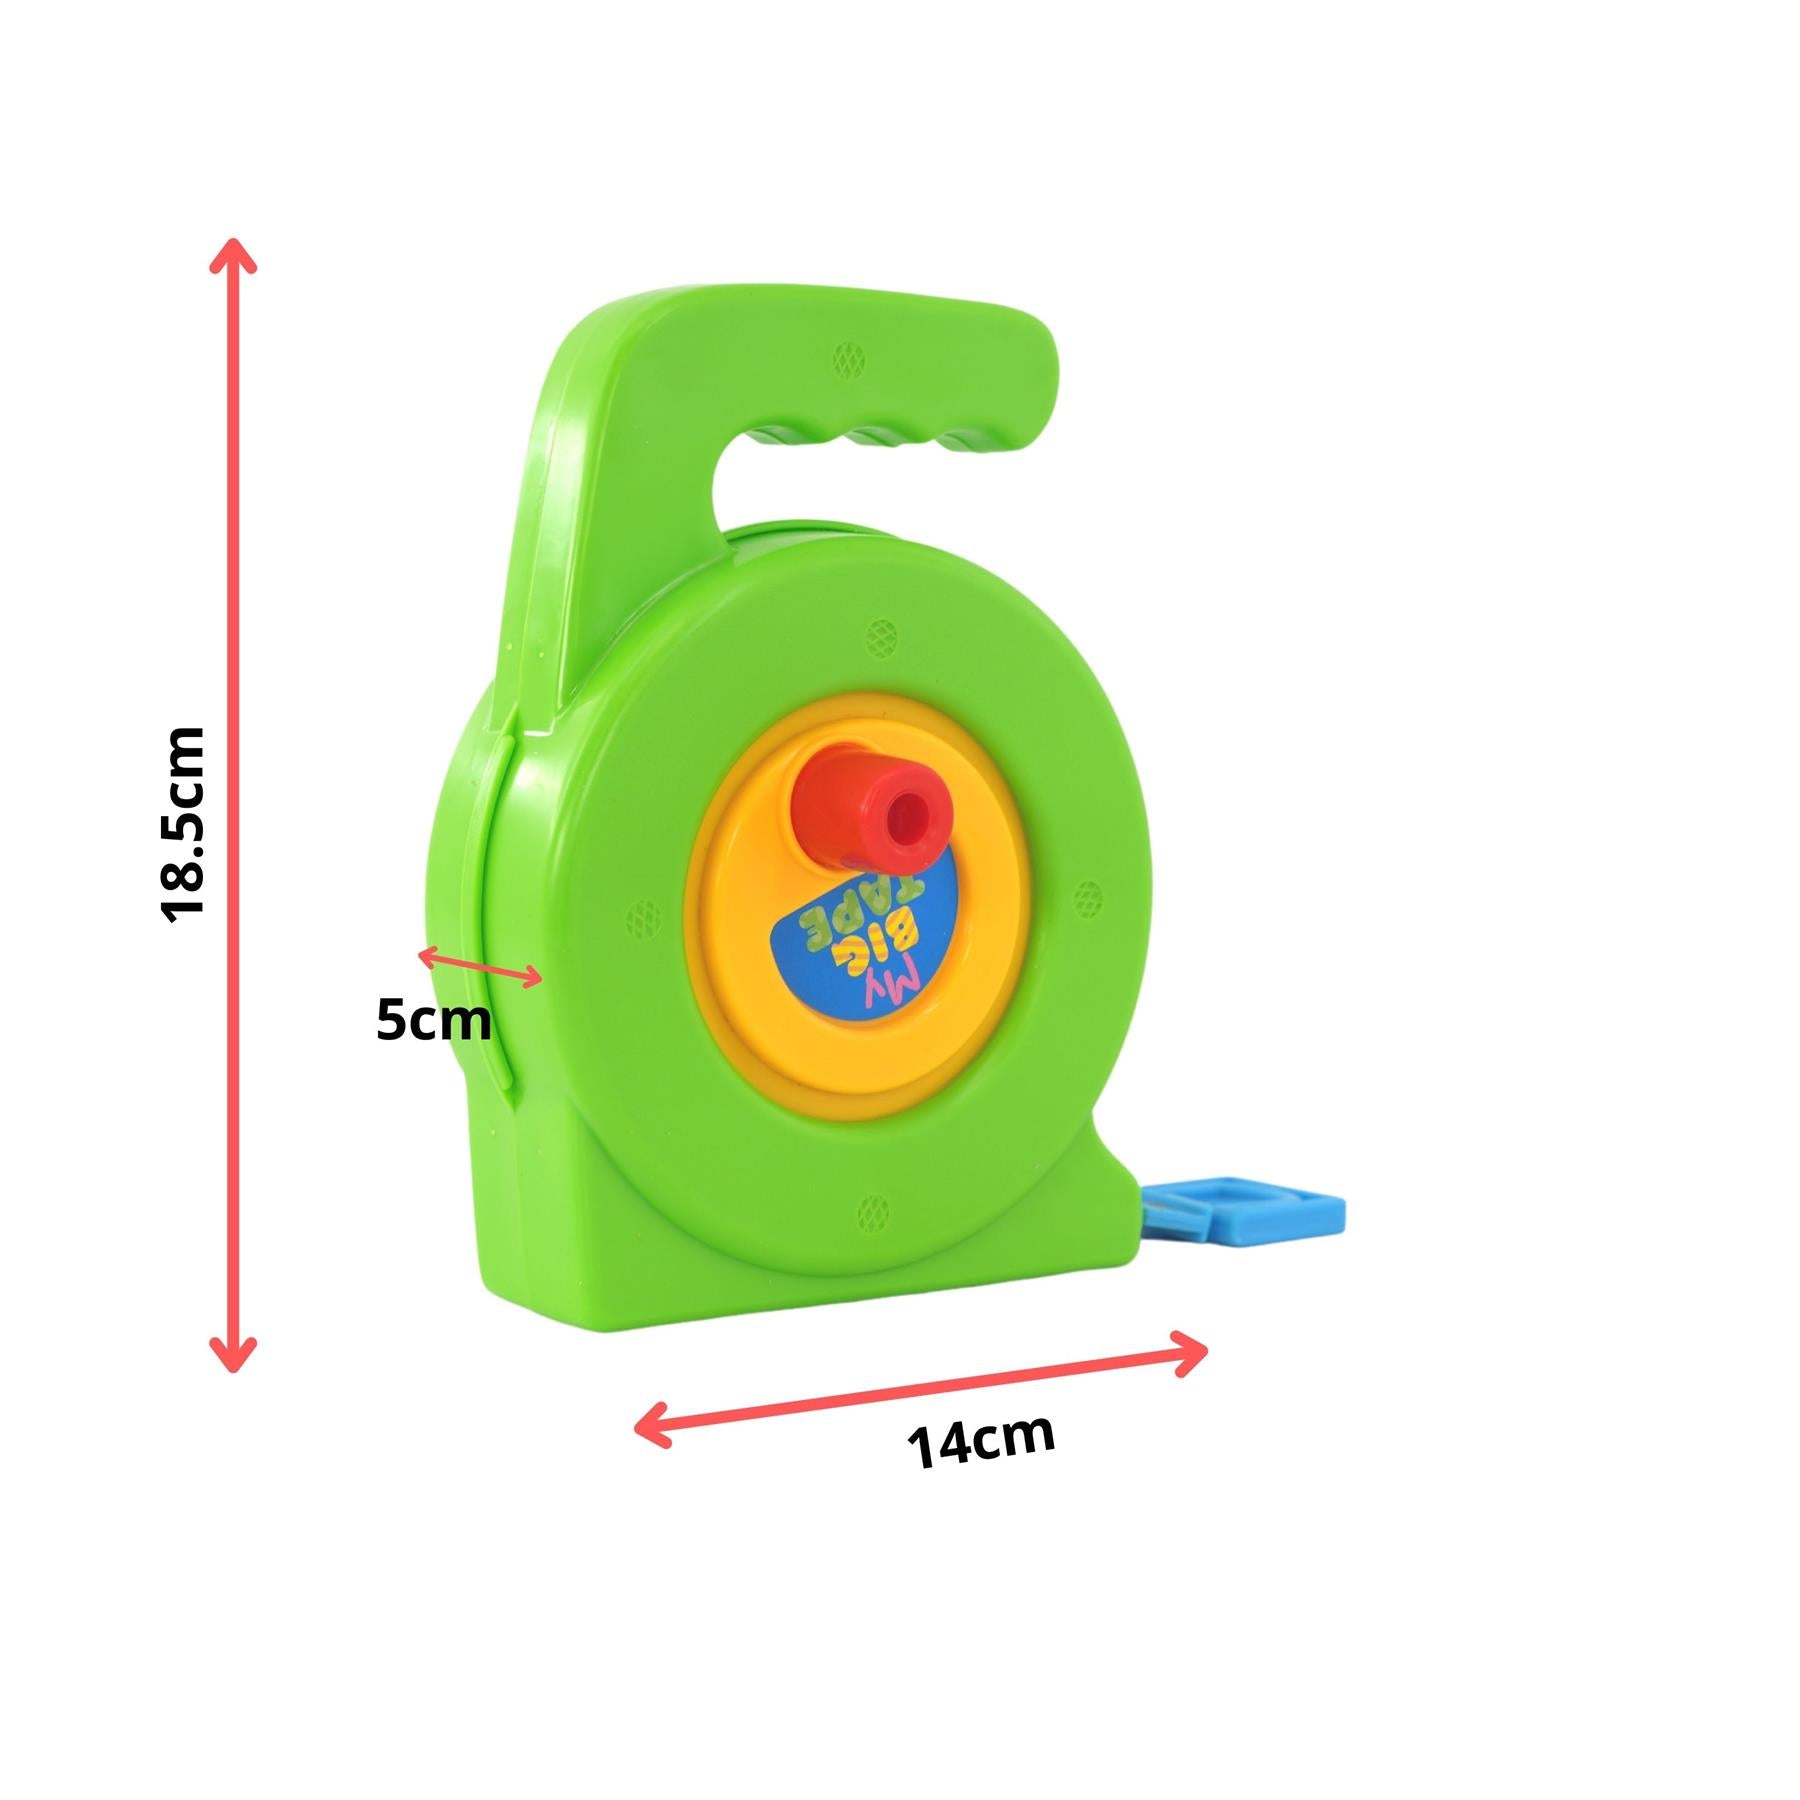 Constructive Playthings Big Tape Measure for Kids, Educational Pretend Play  Toy for Children